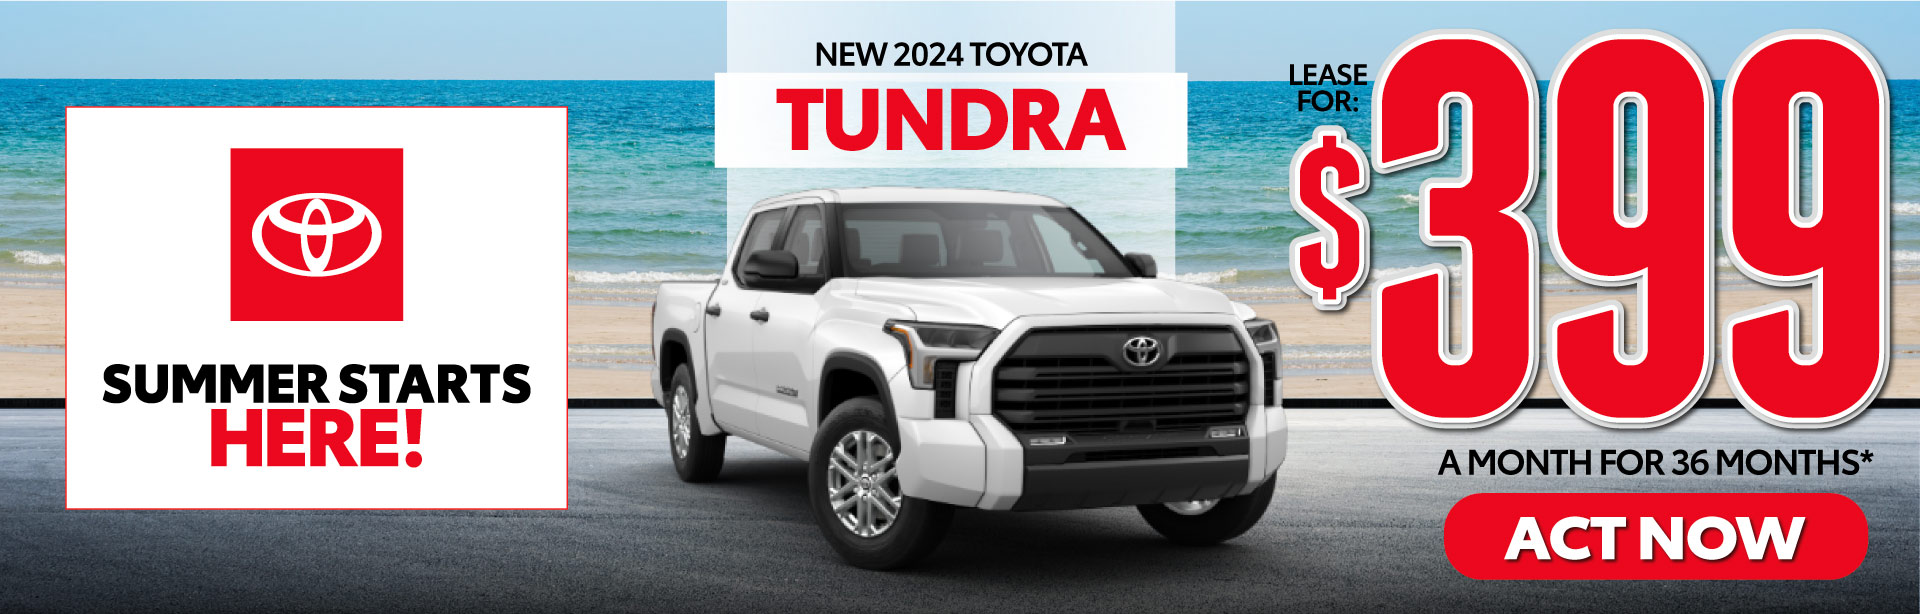 New 2024 Toyota Tundra - Lease for $399 for 36 months* | Act Now